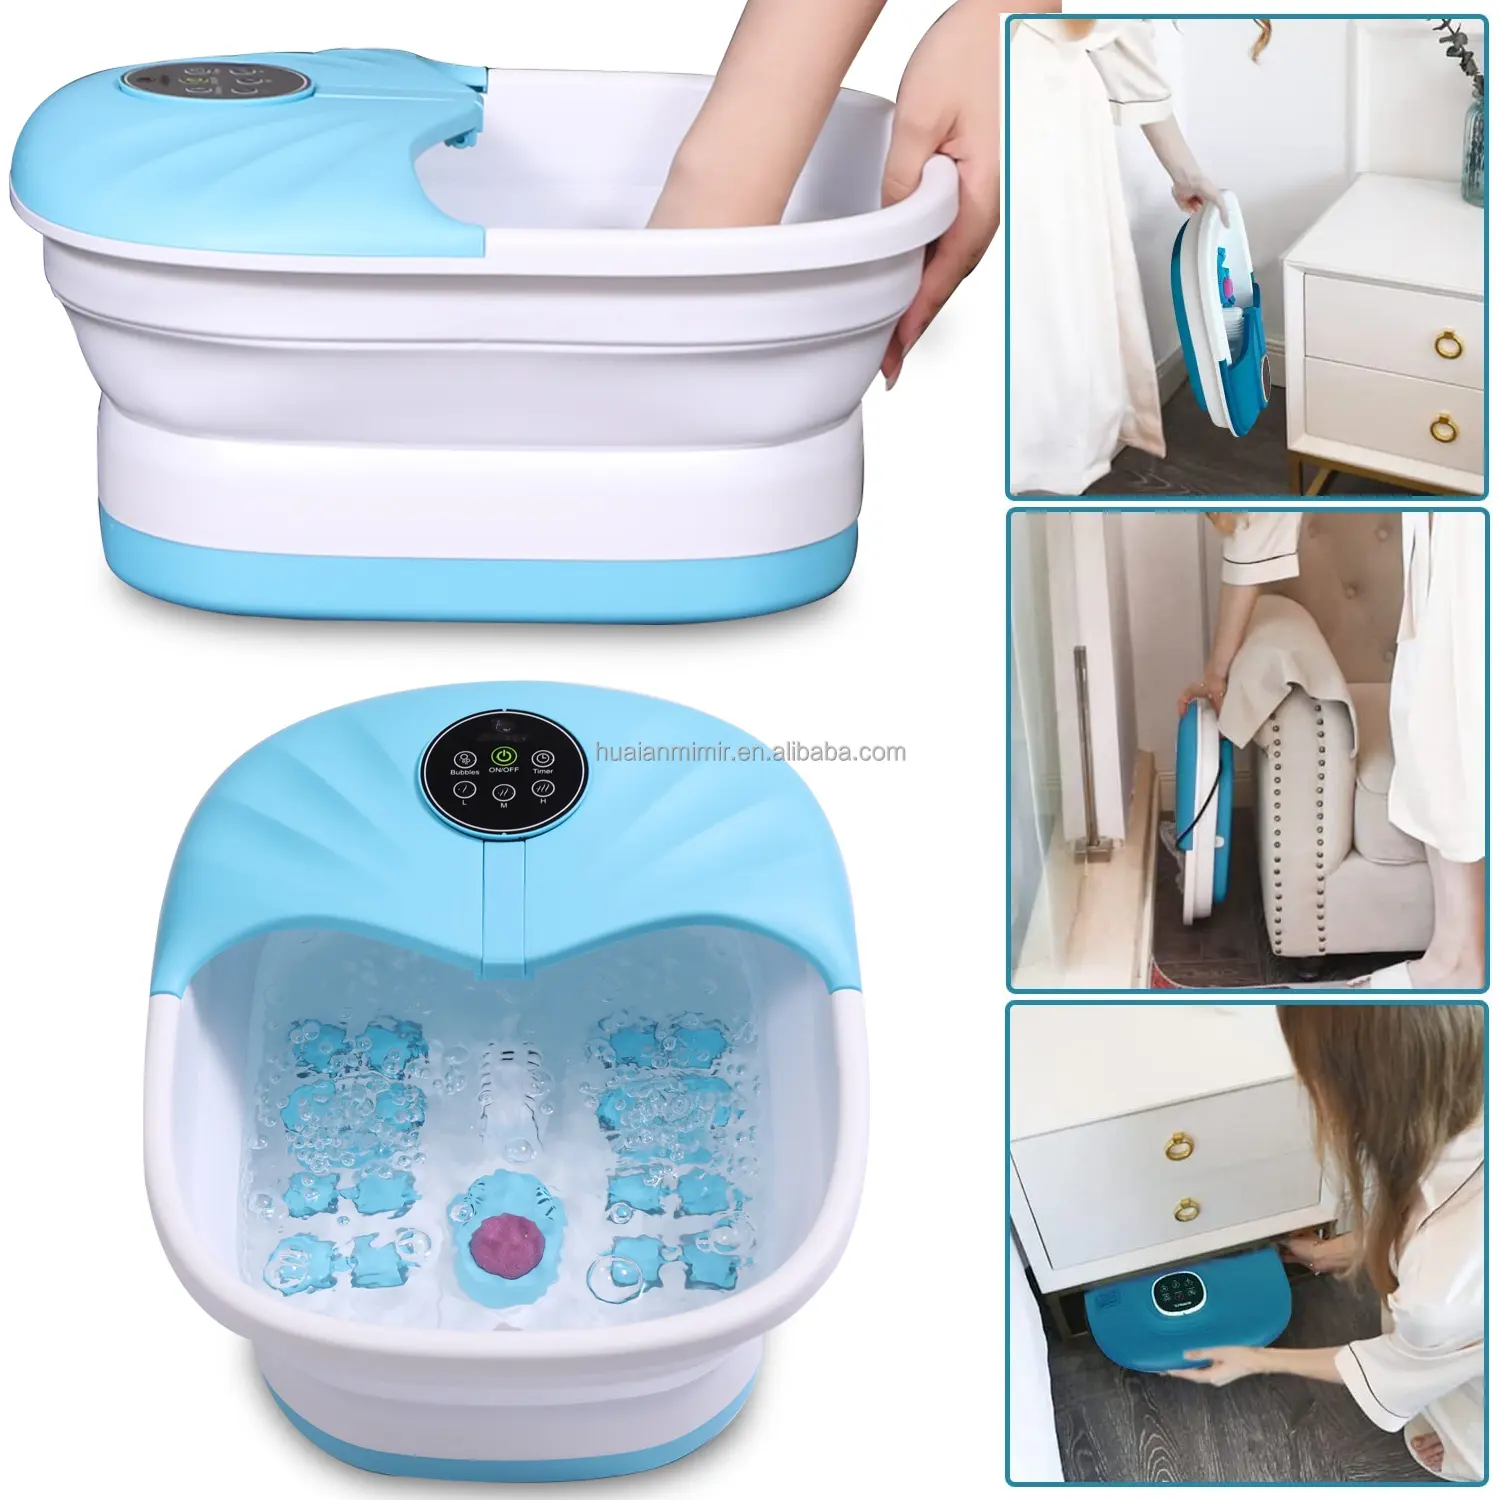 Collapsible Heat Infrared Foot Spa Bath Massager Machine Wilh Heat Bubble Massage And 16pcs Massage Rollers For Foot Soak Basin